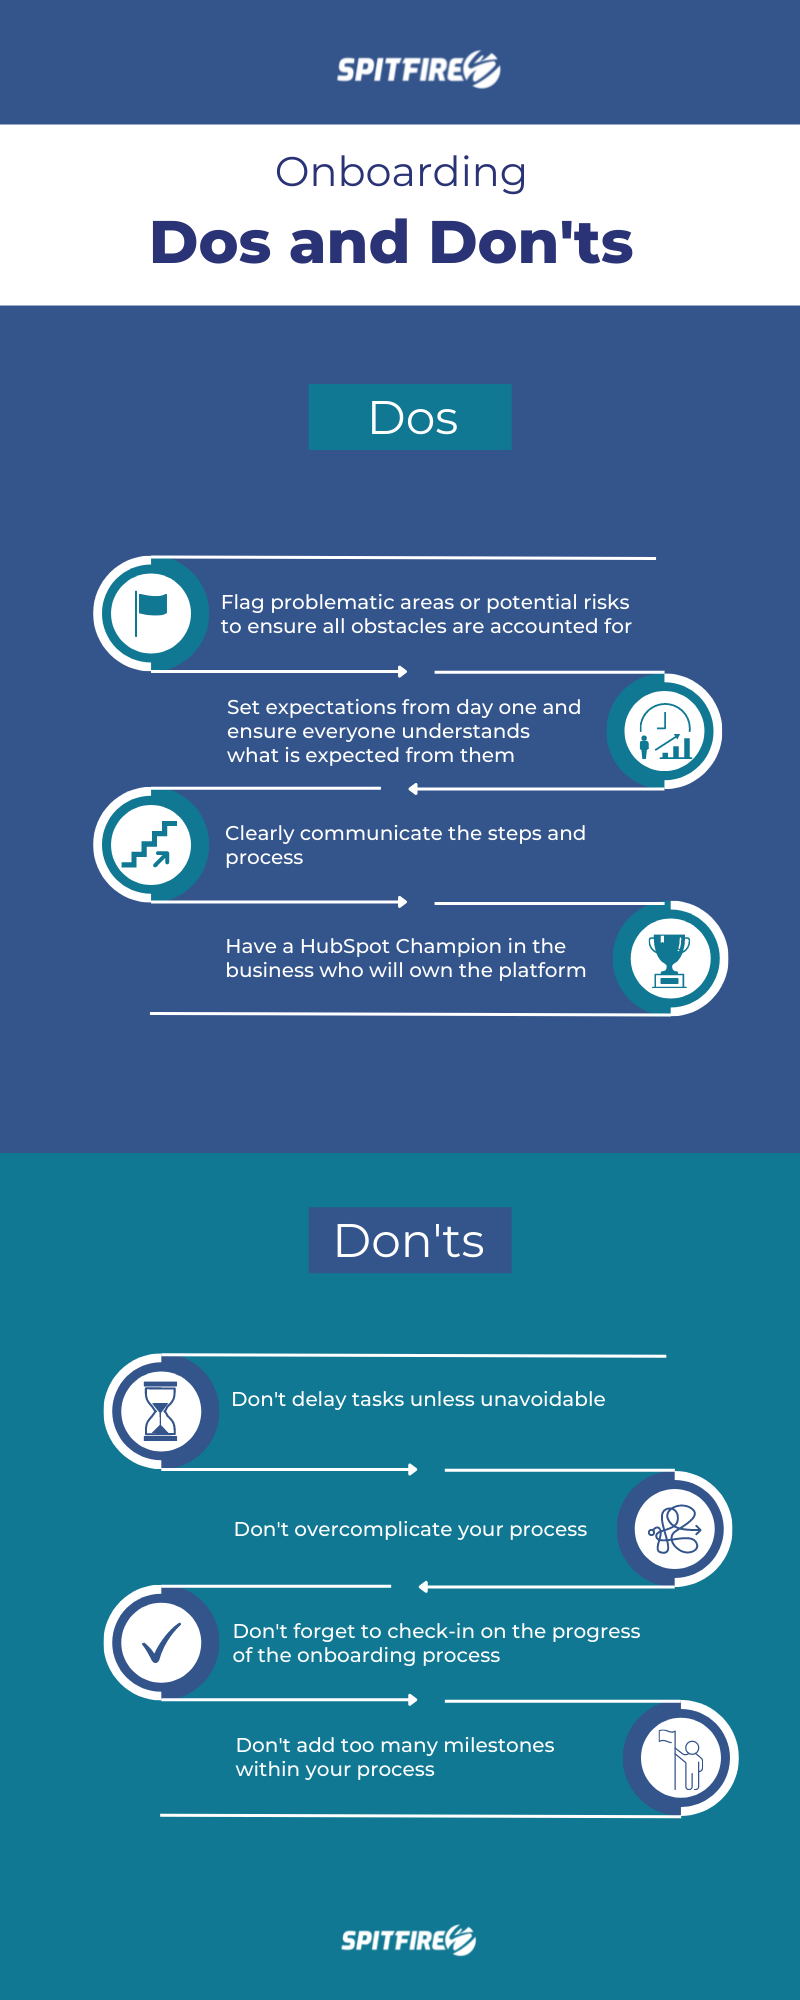 Onboarding Dos and Don'ts Infographic 